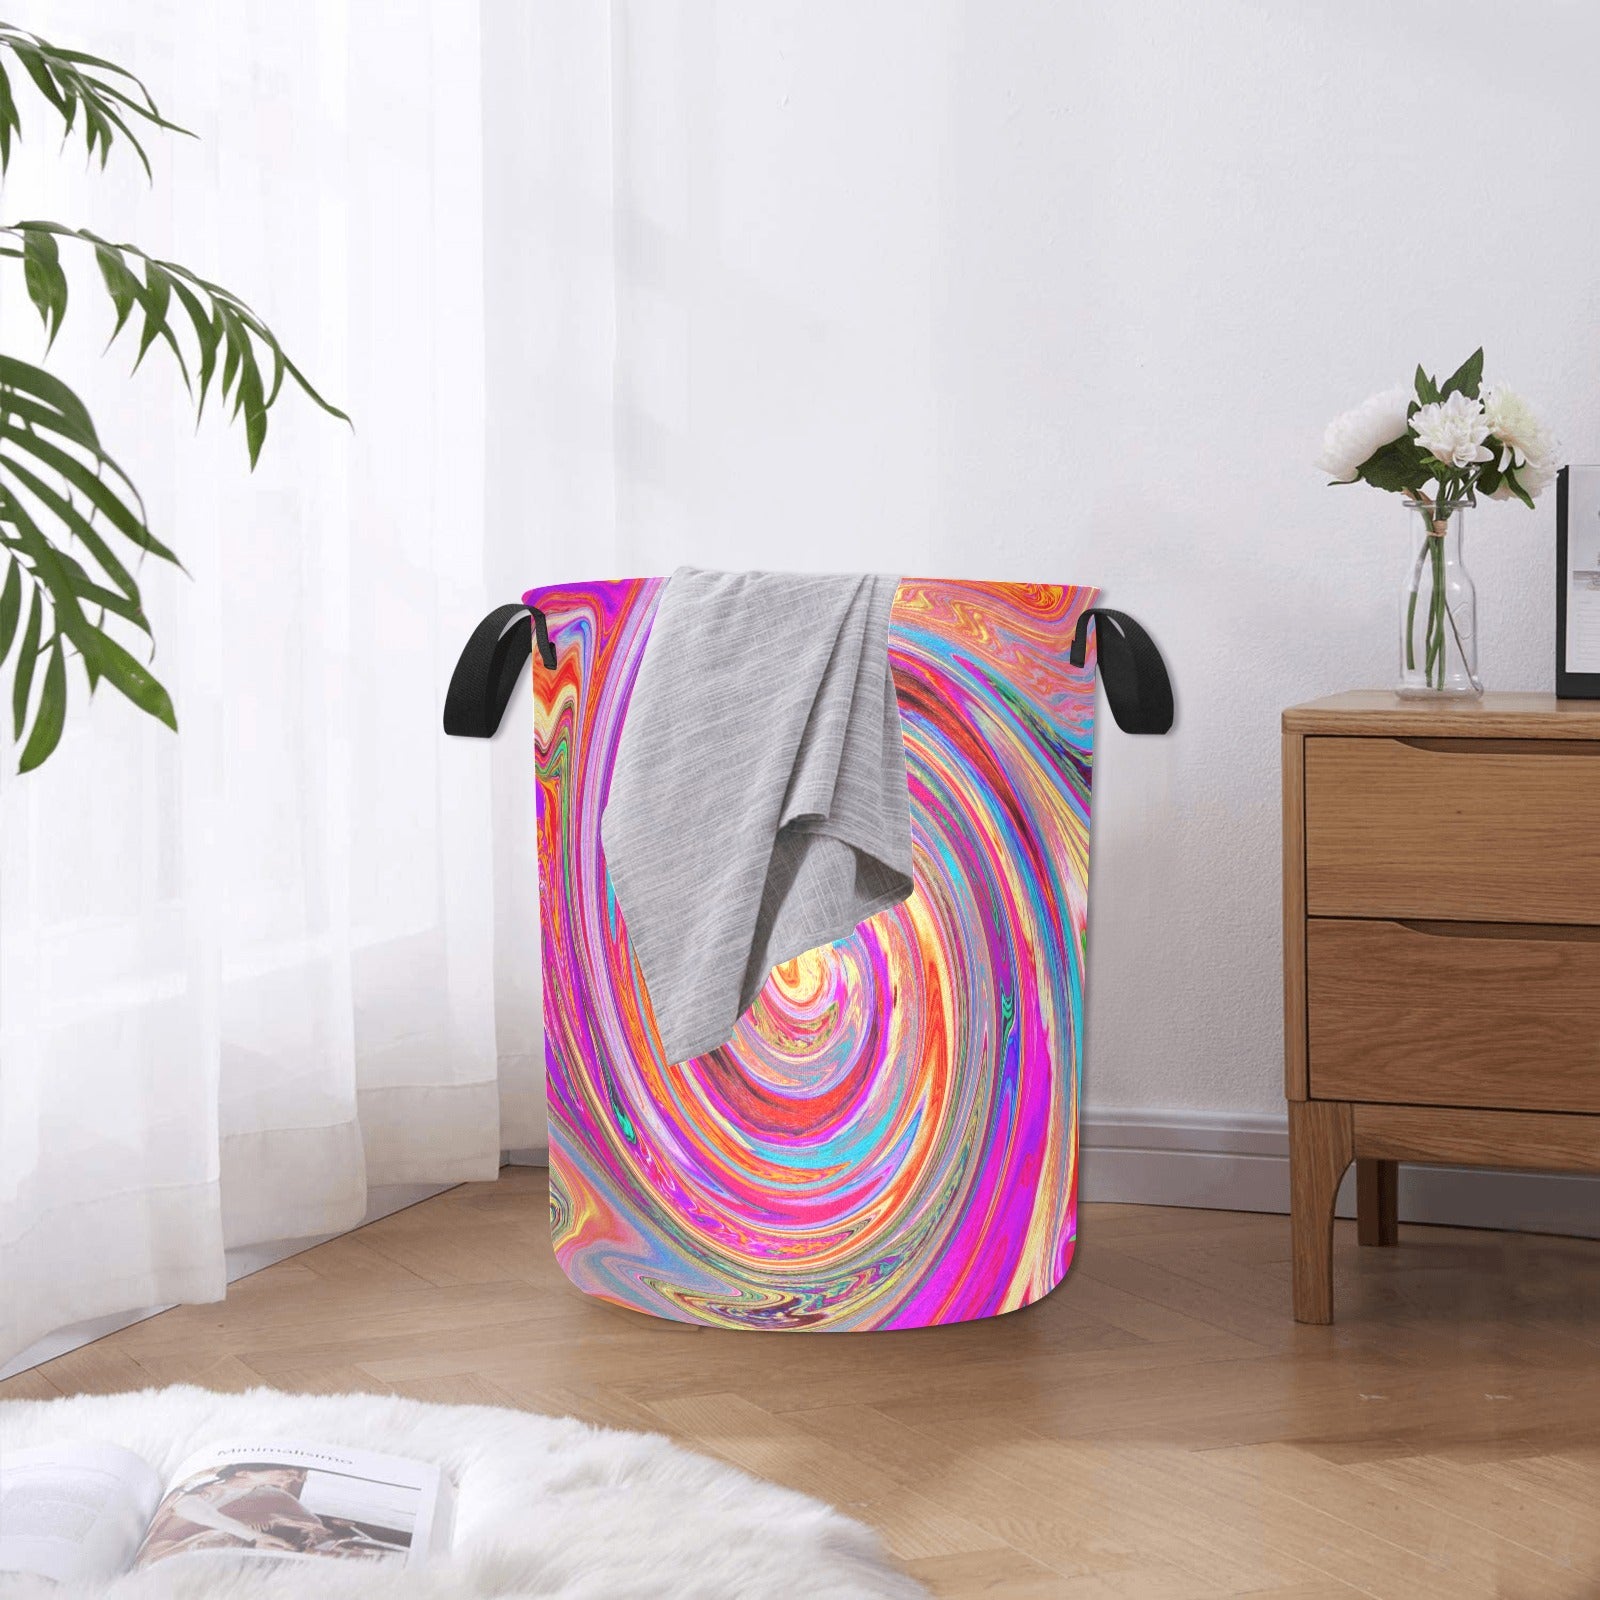 Fabric Laundry Basket with Handles, Colorful Rainbow Swirl Retro Abstract Design